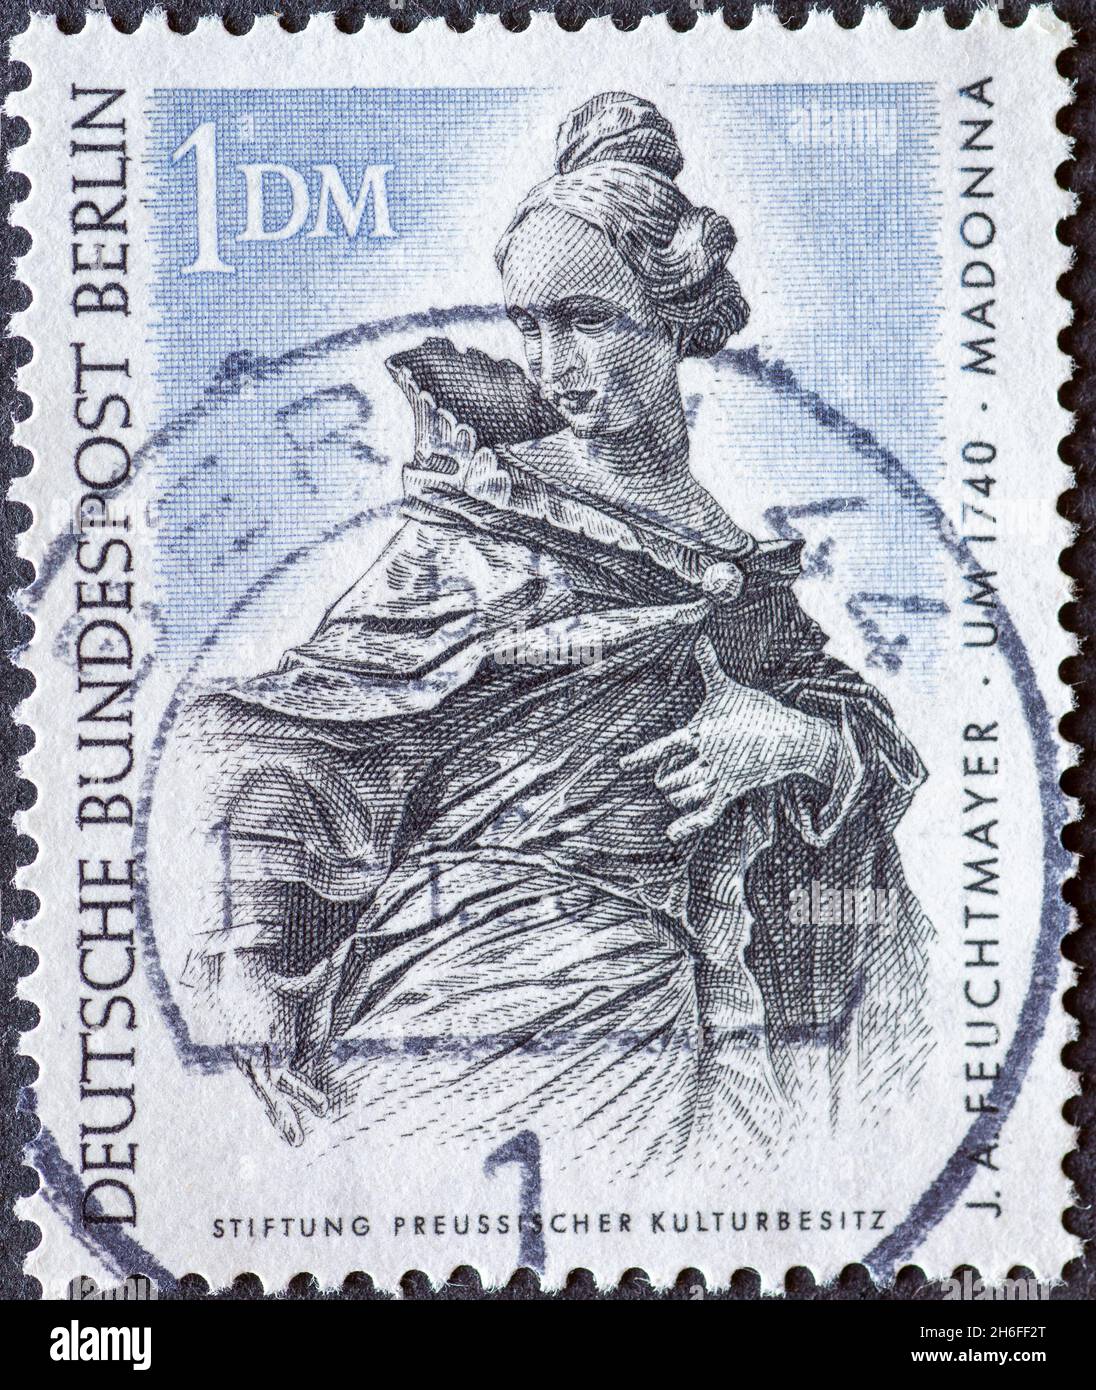 GERMANY, Berlin - CIRCA 1967: a postage stamp from Germany, Berlin showing a Madonna around 1740, by the sculptor Joseph Anton Feuchtmayer. Prussian C Stock Photo